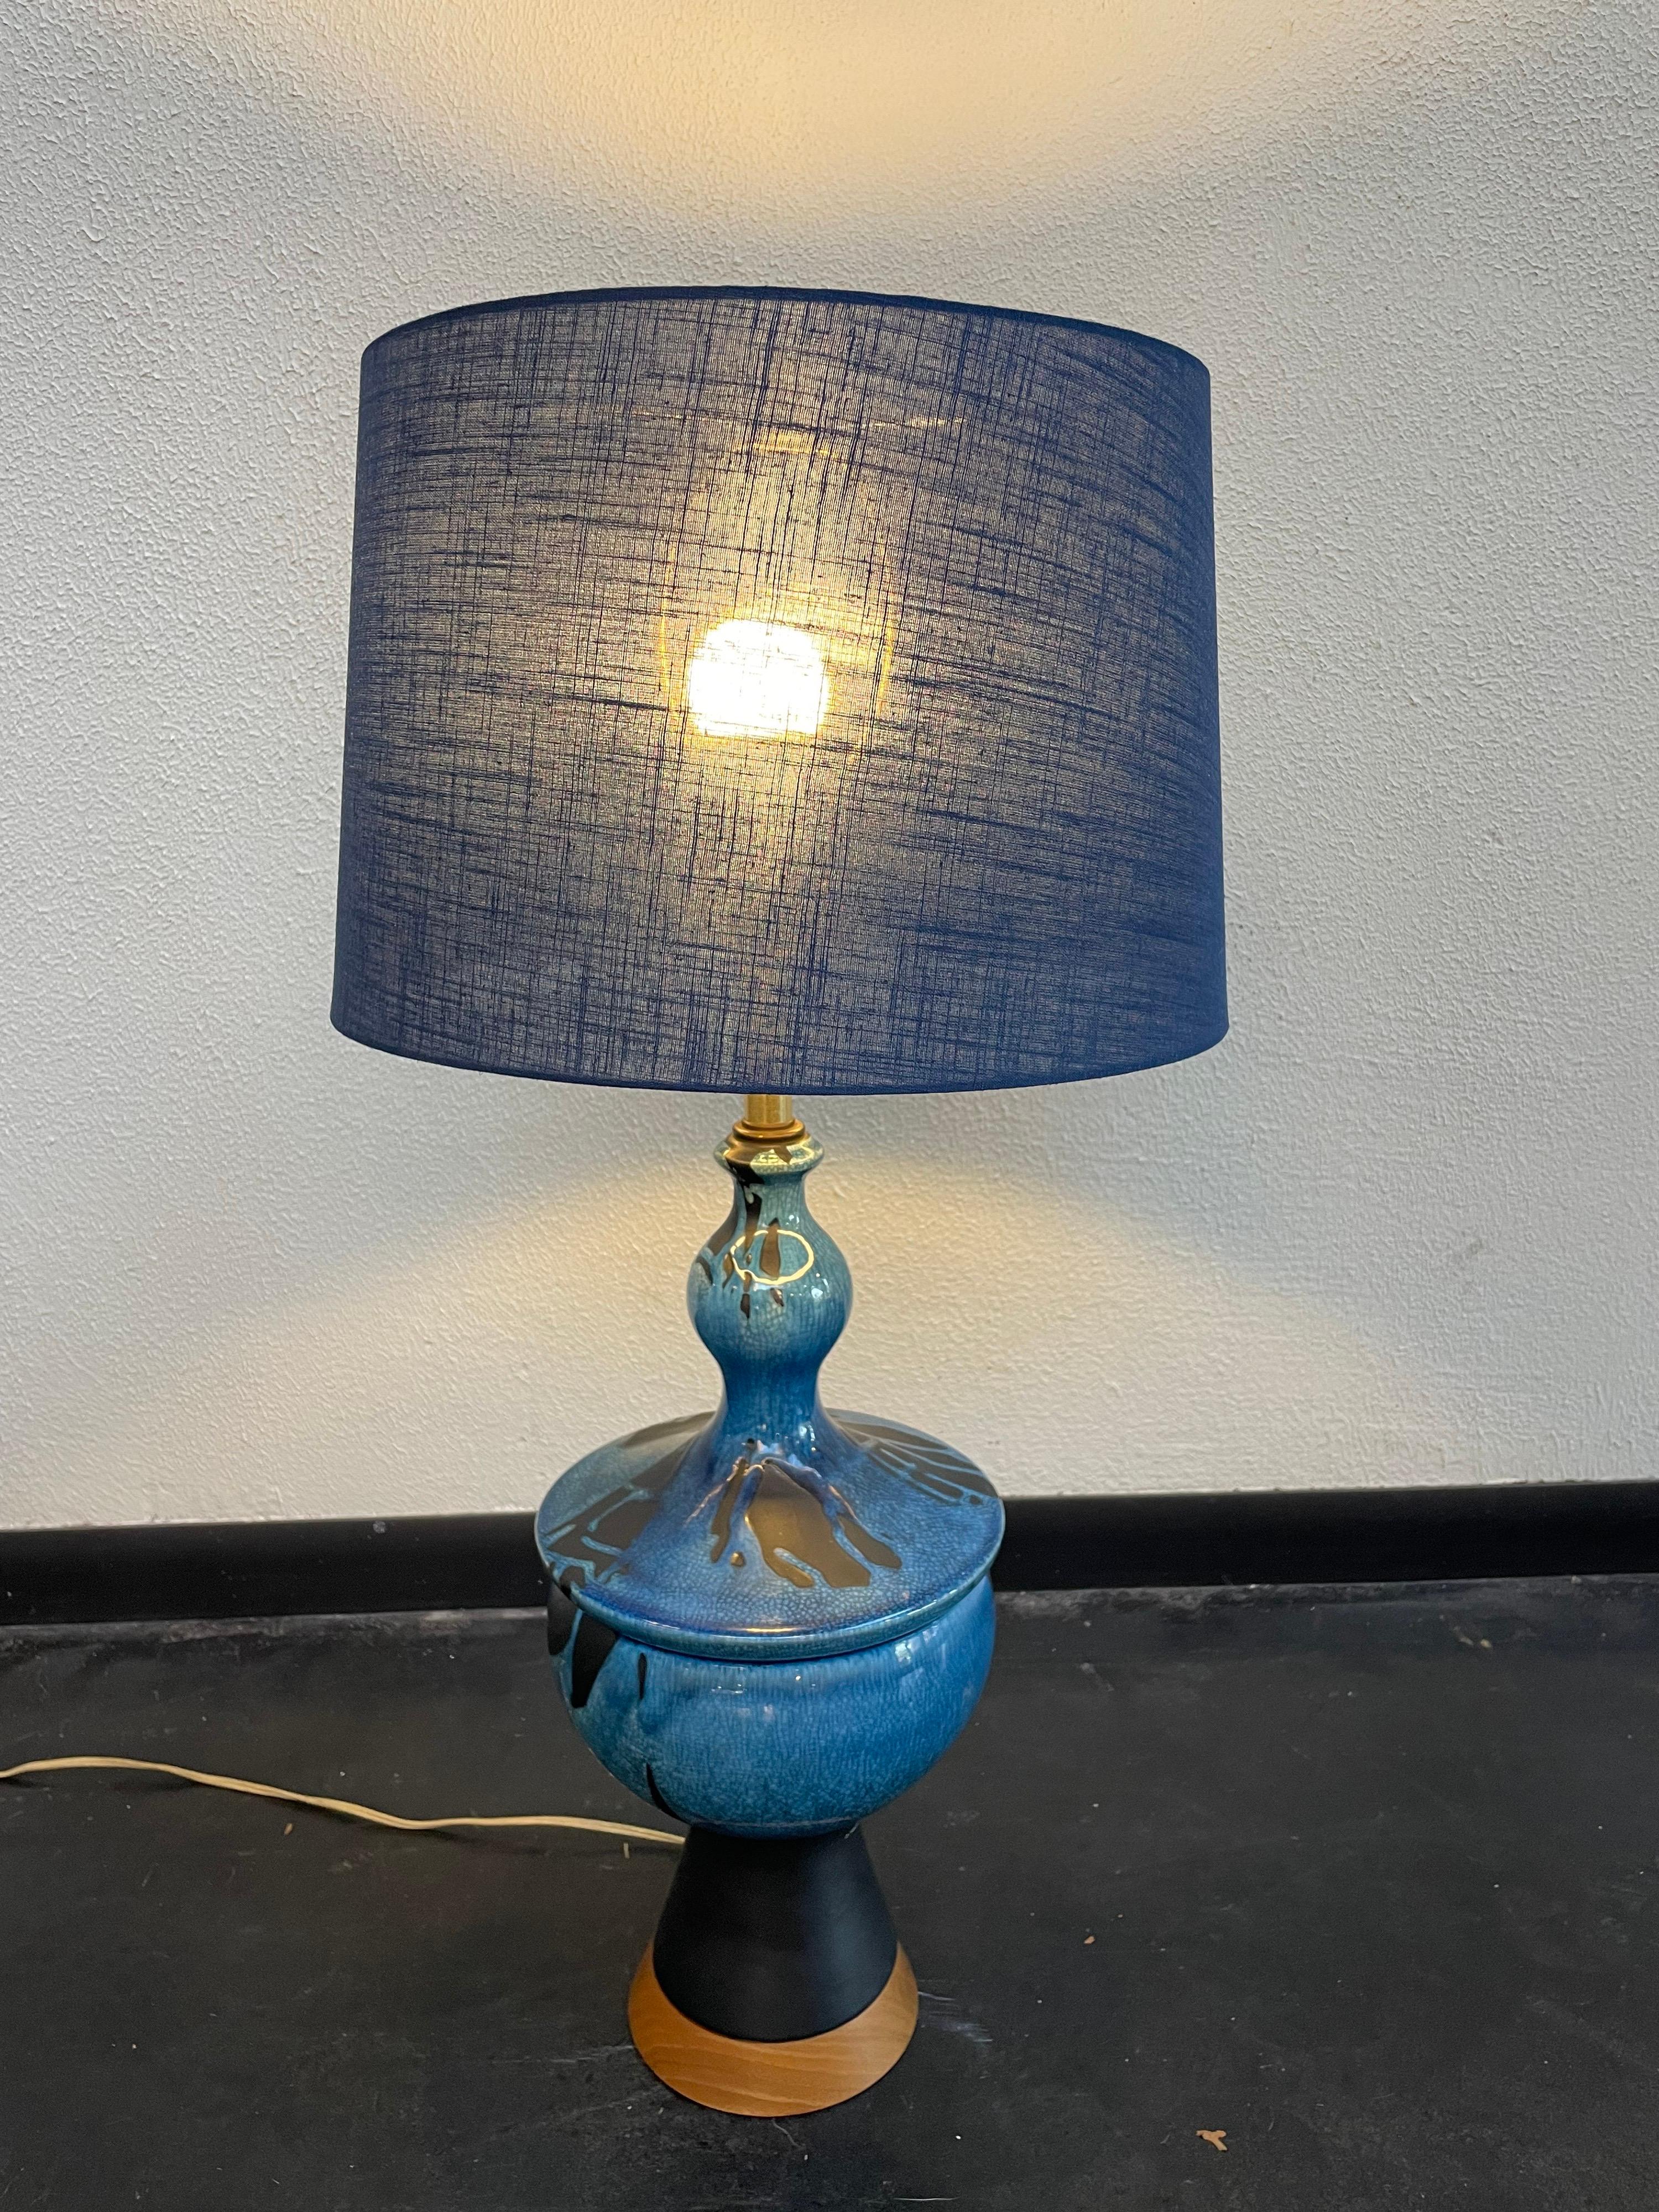 Gorgeous blue Danish ceramic table lamp featuring a wooden base. Shade included.